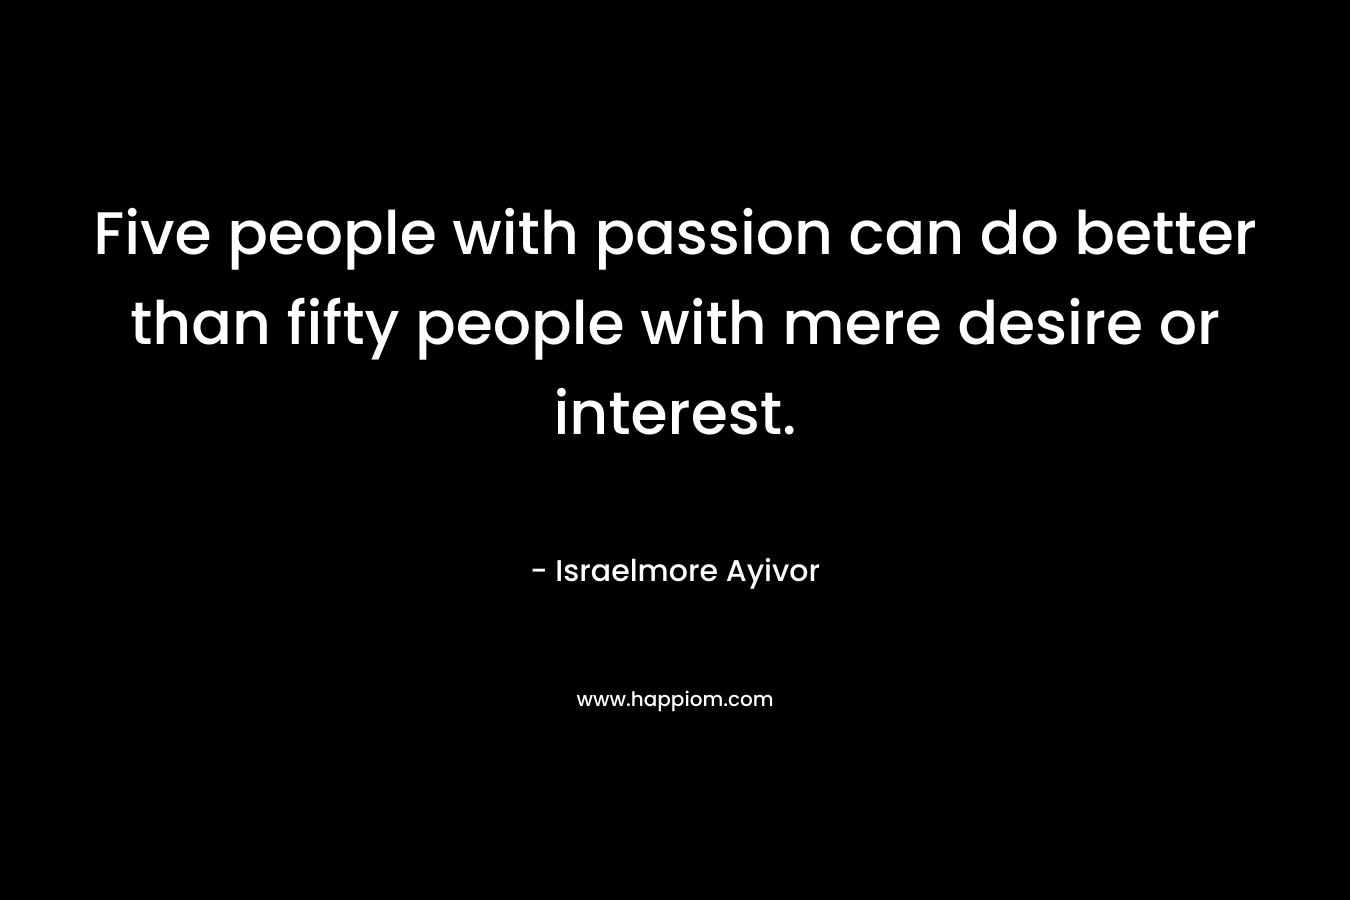 Five people with passion can do better than fifty people with mere desire or interest.